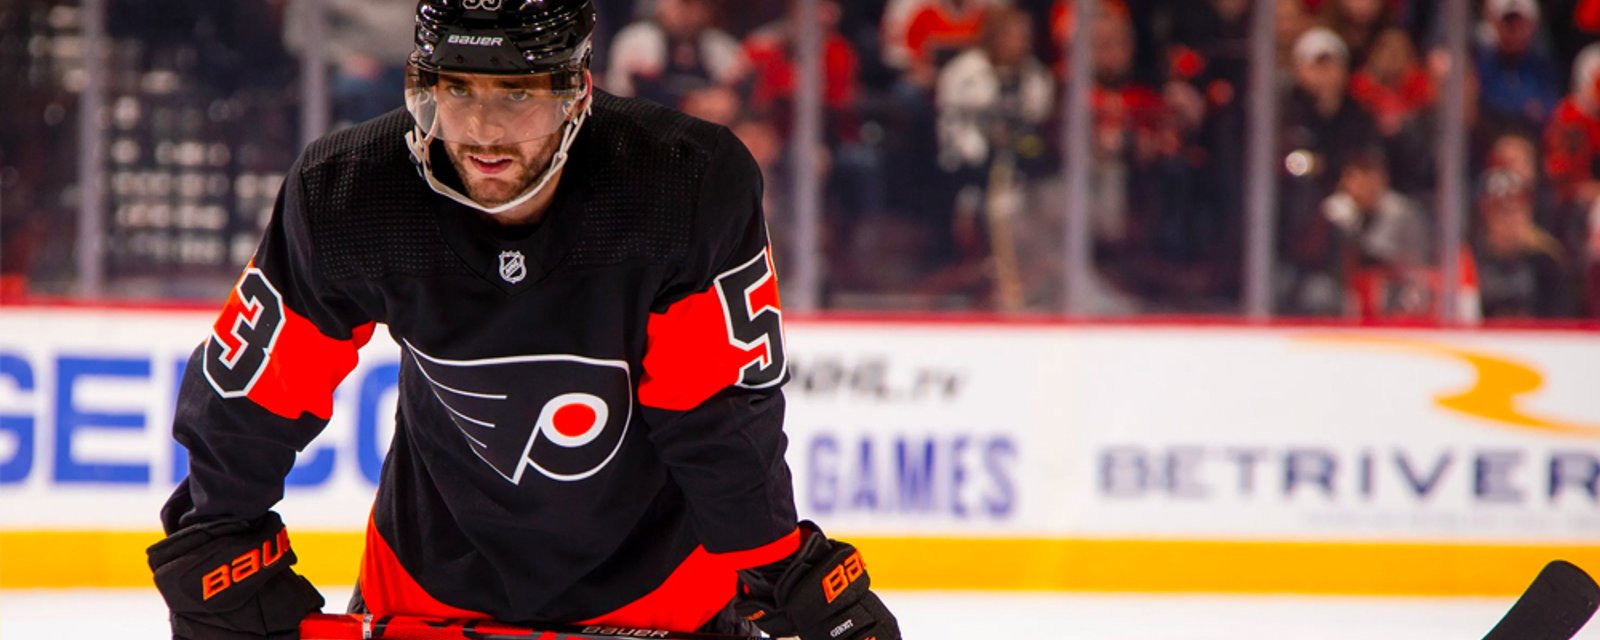 Gostisbehere undergoes yet another knee surgery